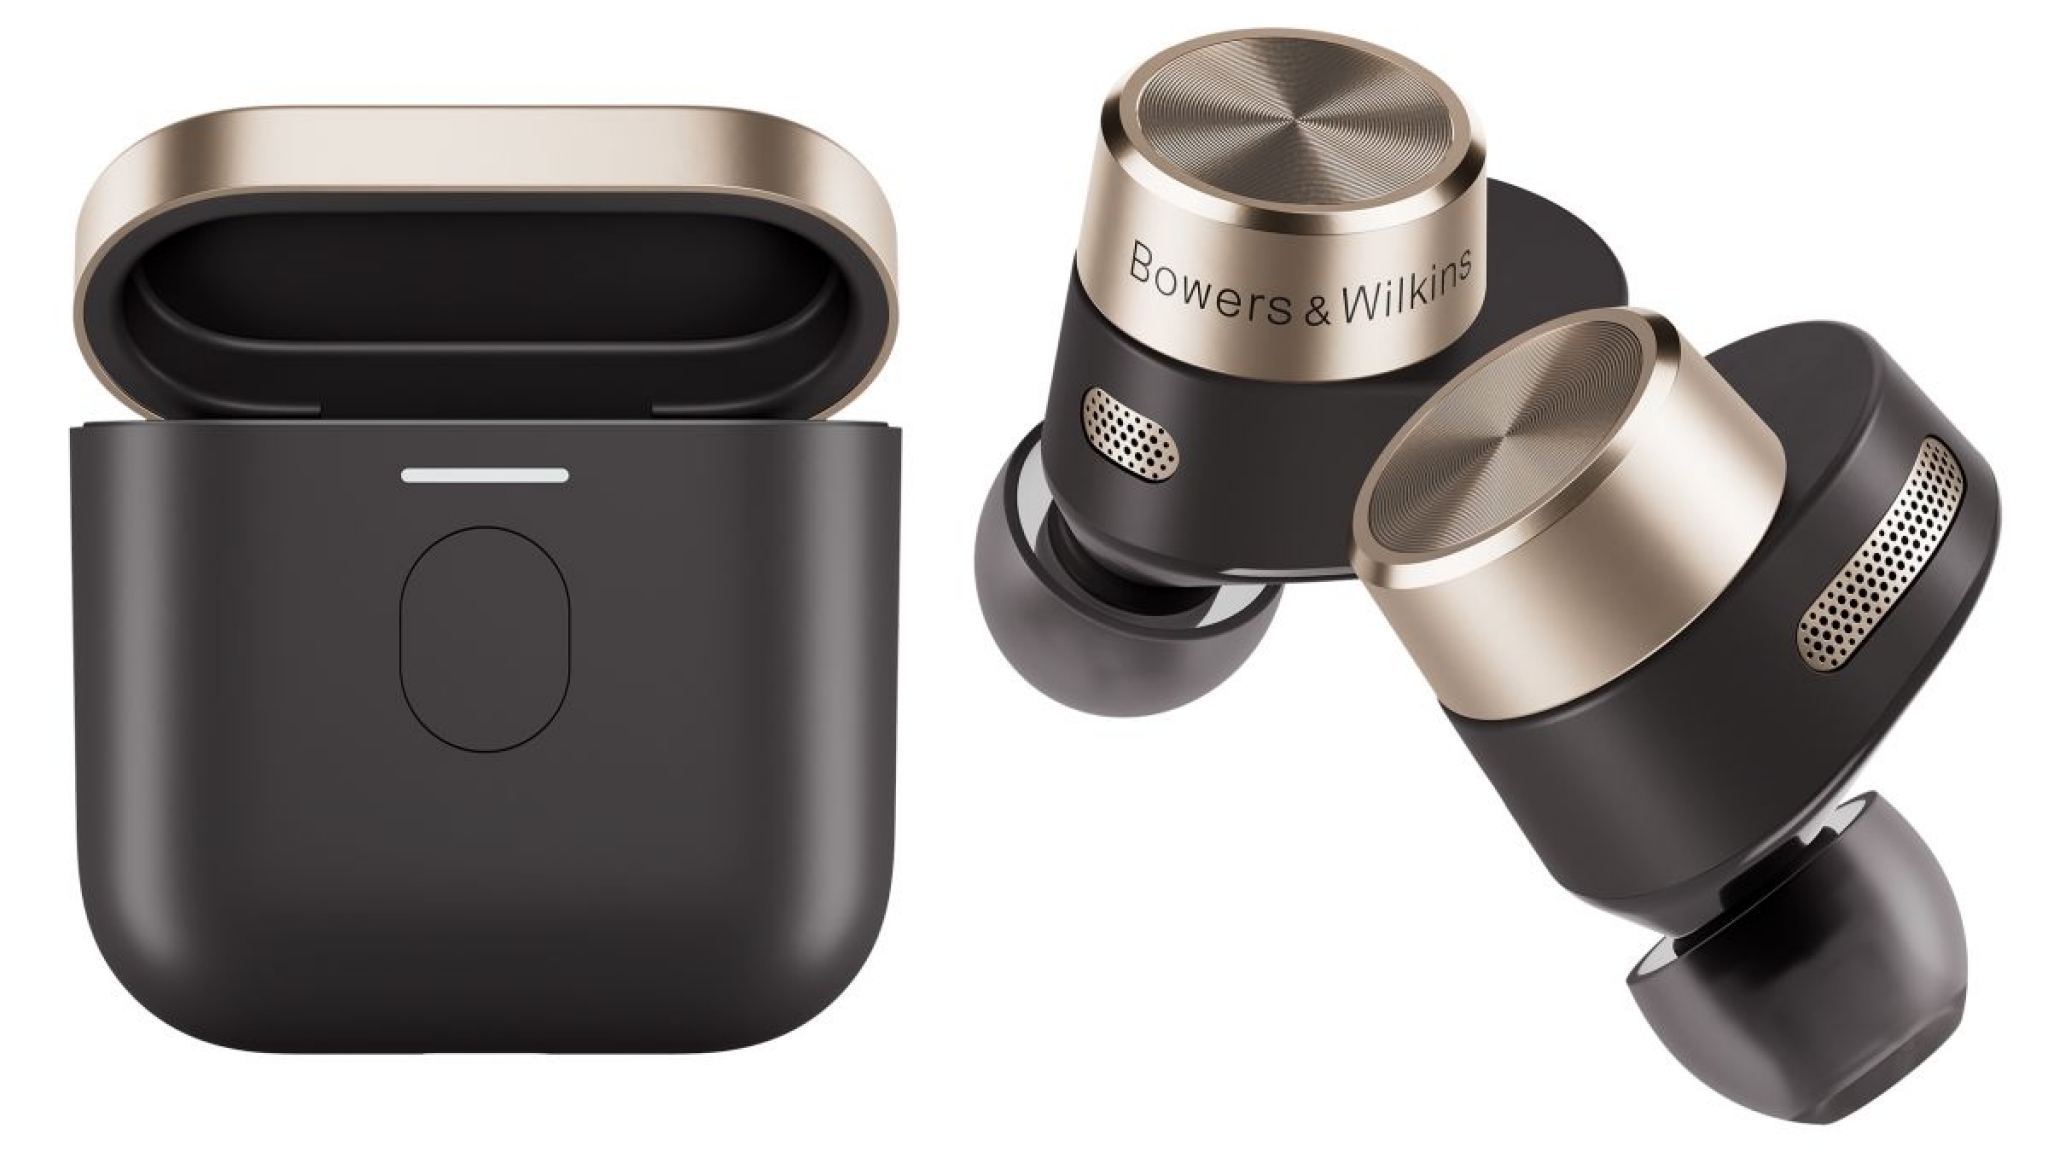 Bowers & Wilkins’ New Wireless Earbuds Can Stream Audio From Devices Without Bluetooth, Including Airplane Seats